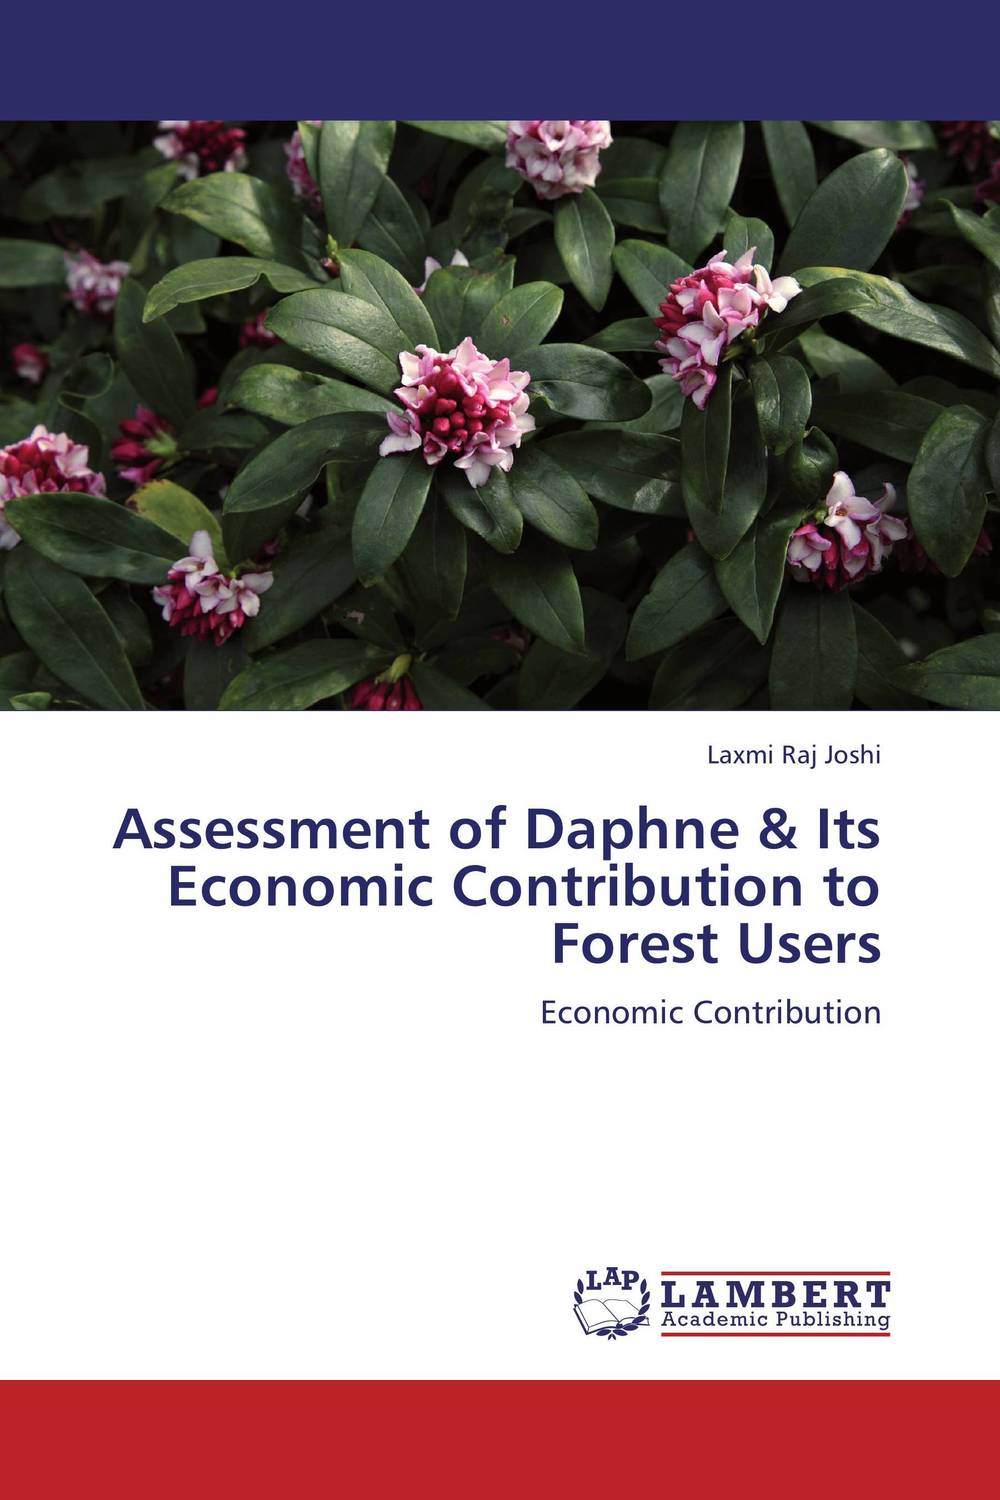 Assessment of Daphne & Its Economic Contribution to Forest Users